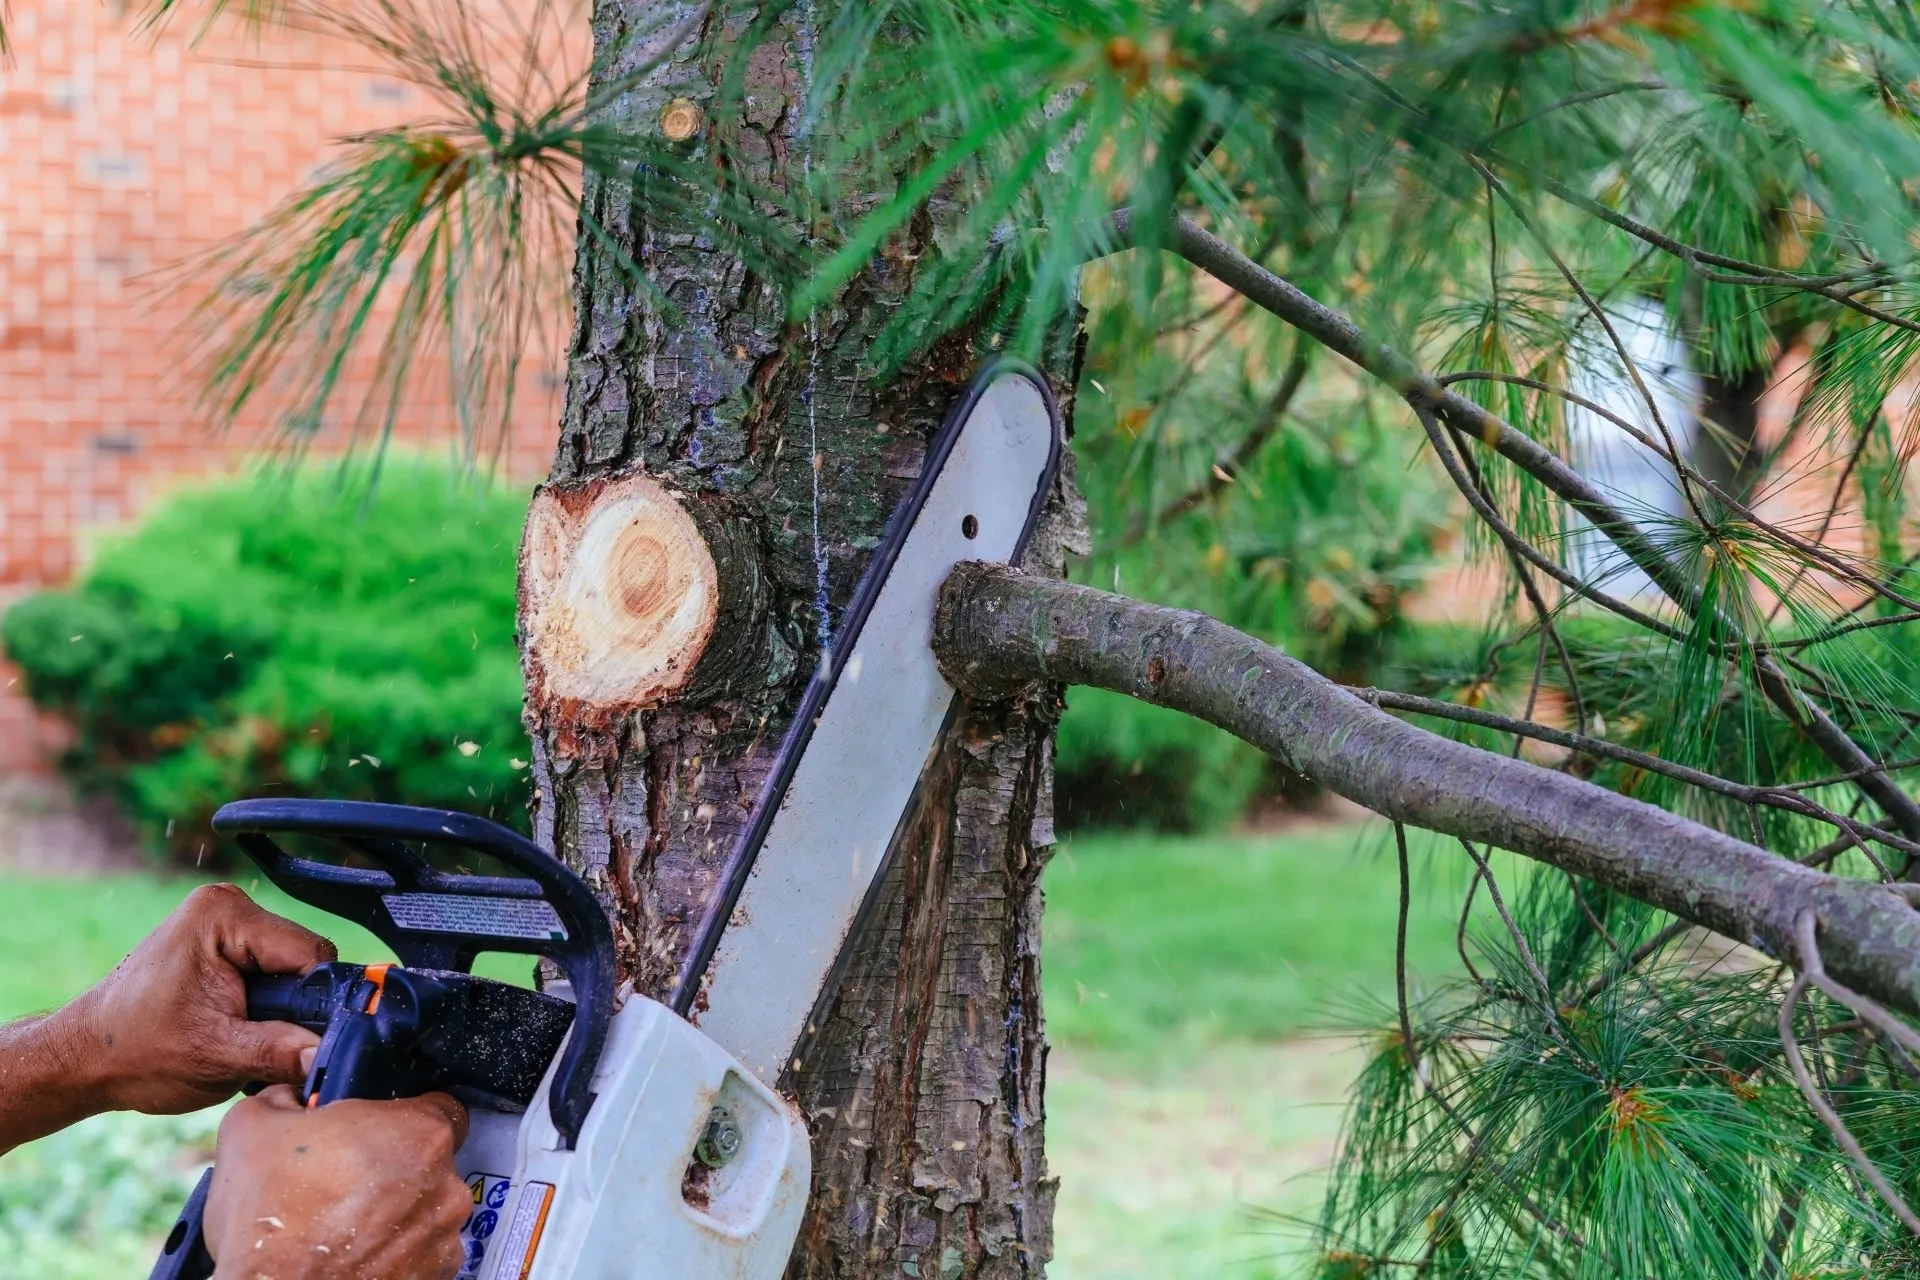 Common Tree Trimming & Pruning Mistakes: Best Tree Trimming Company